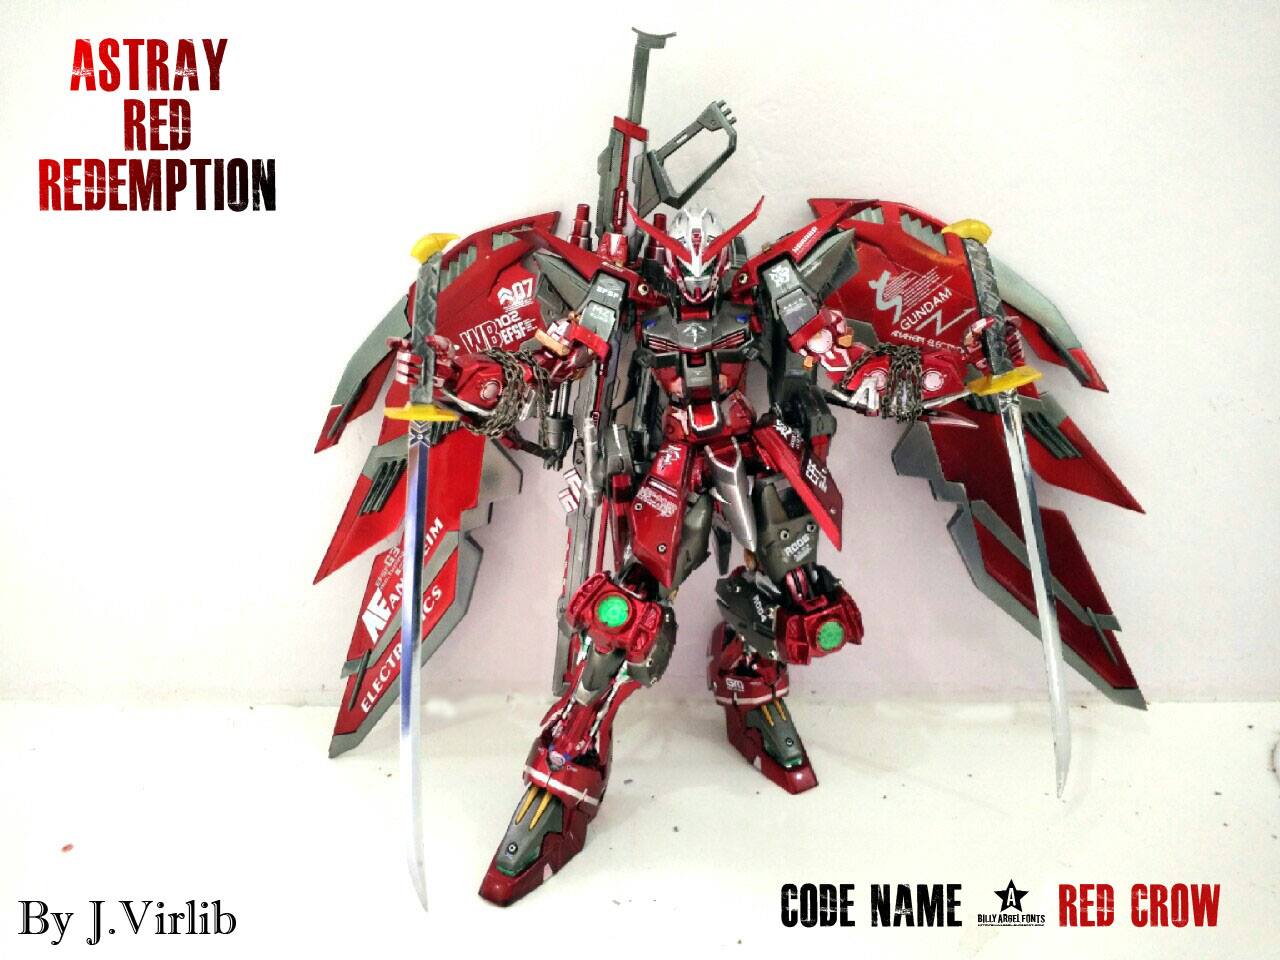 Custom Build: MG 1/100 Gundam Astray Red Redemption "Red Crow"